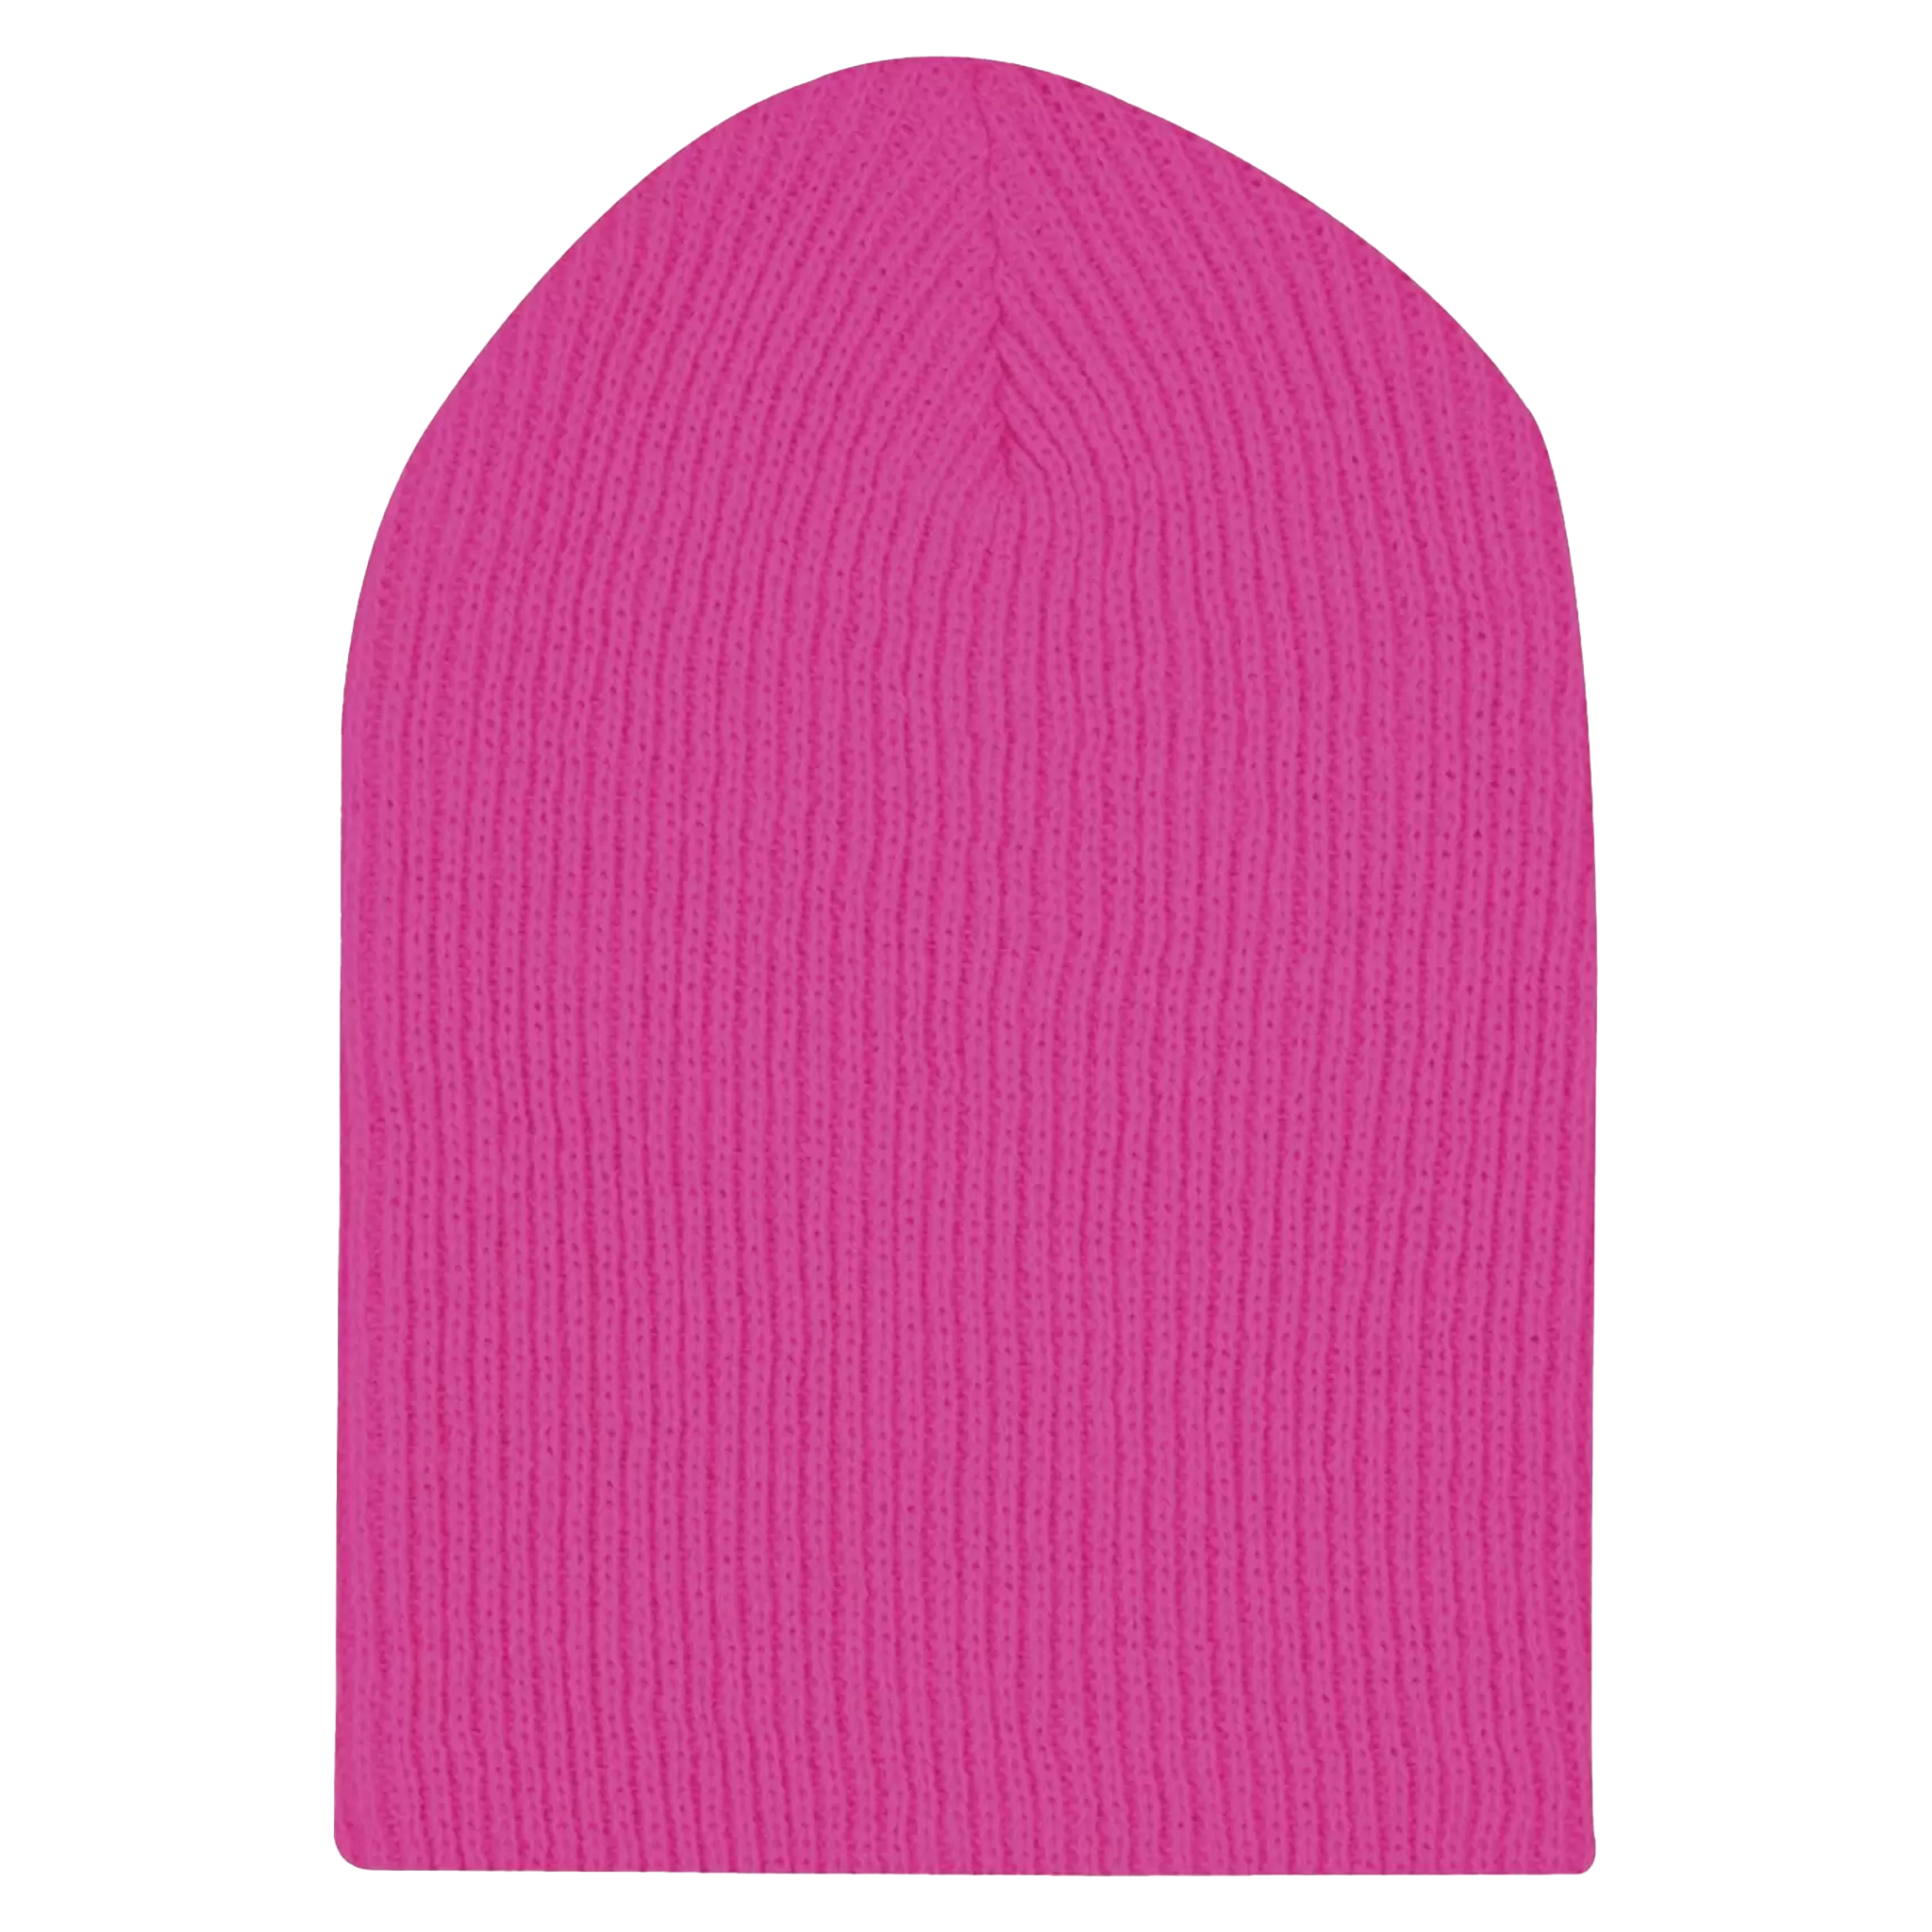 ATC Everyday Rib Knit Slouch Beanie - Adult Unisex One Size Fits All - Pink